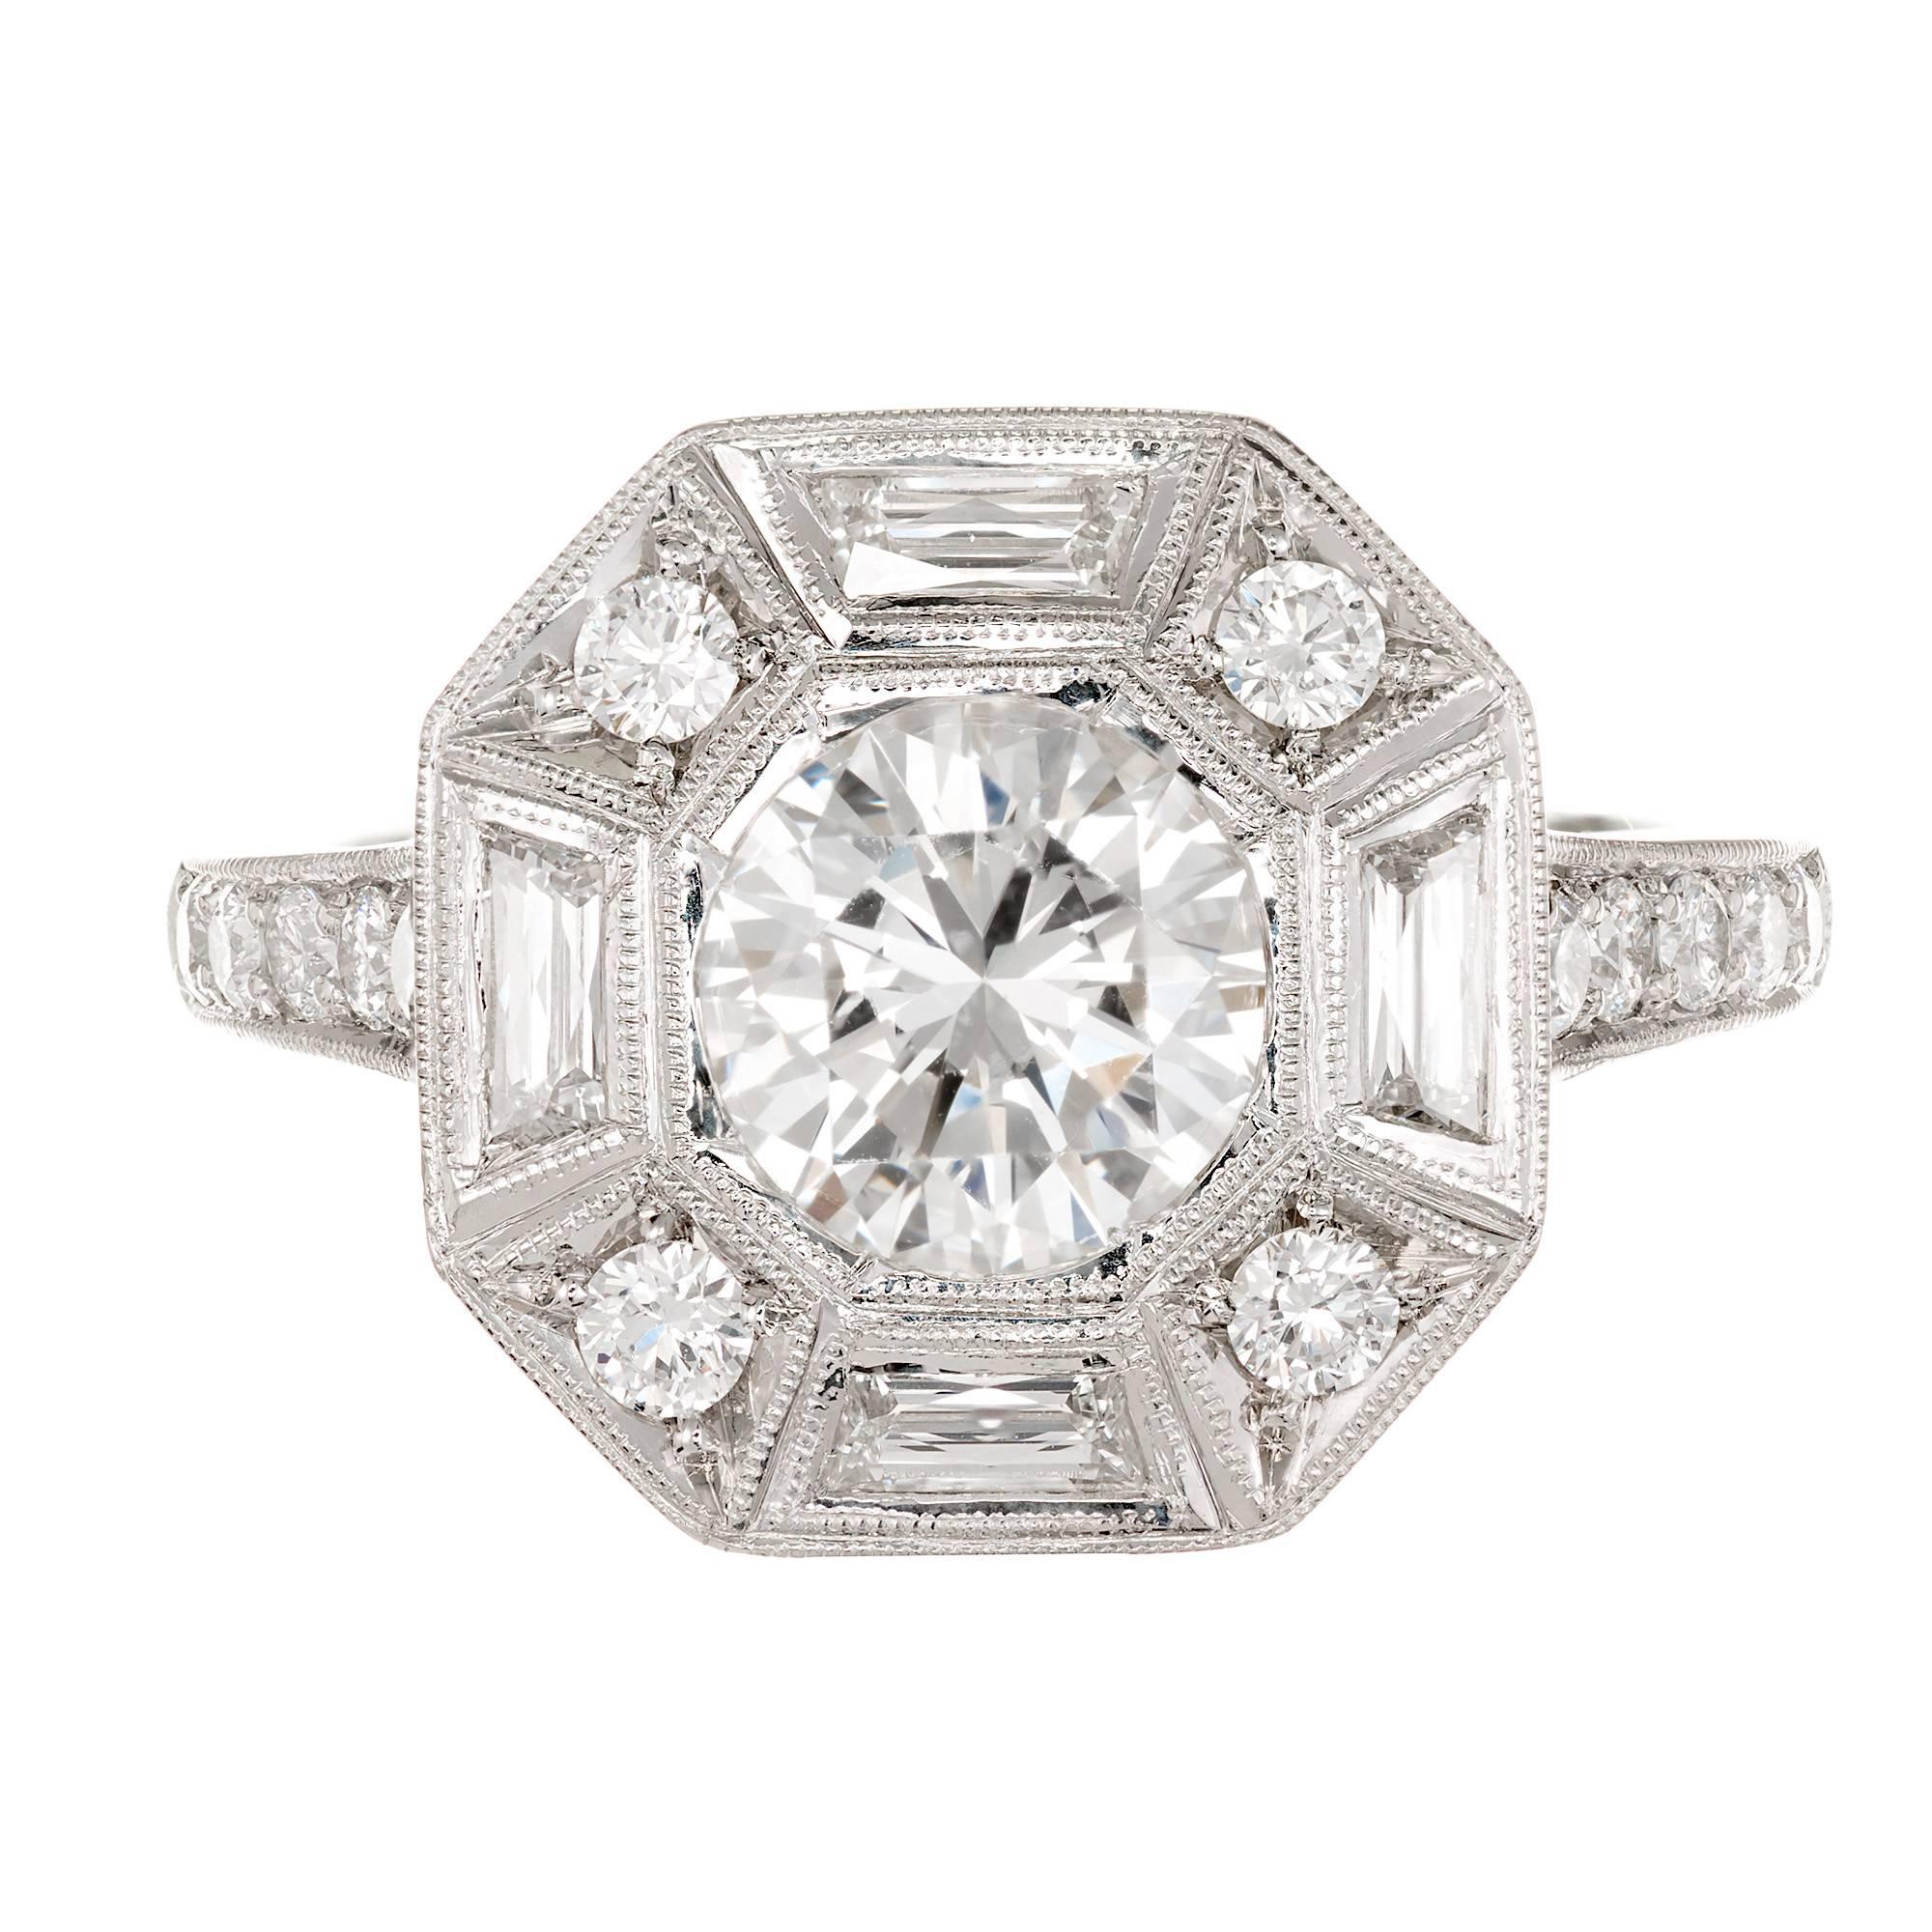 Peter Suchy Octagonal diamond platinum engagement ring with a round center diamond and French cut trapezoid diamonds and round brilliant cut diamonds in an octagonal top. 

1 round diamond, approx. total weight 1.26cts, H, VS1, 60.1% depth and 61%